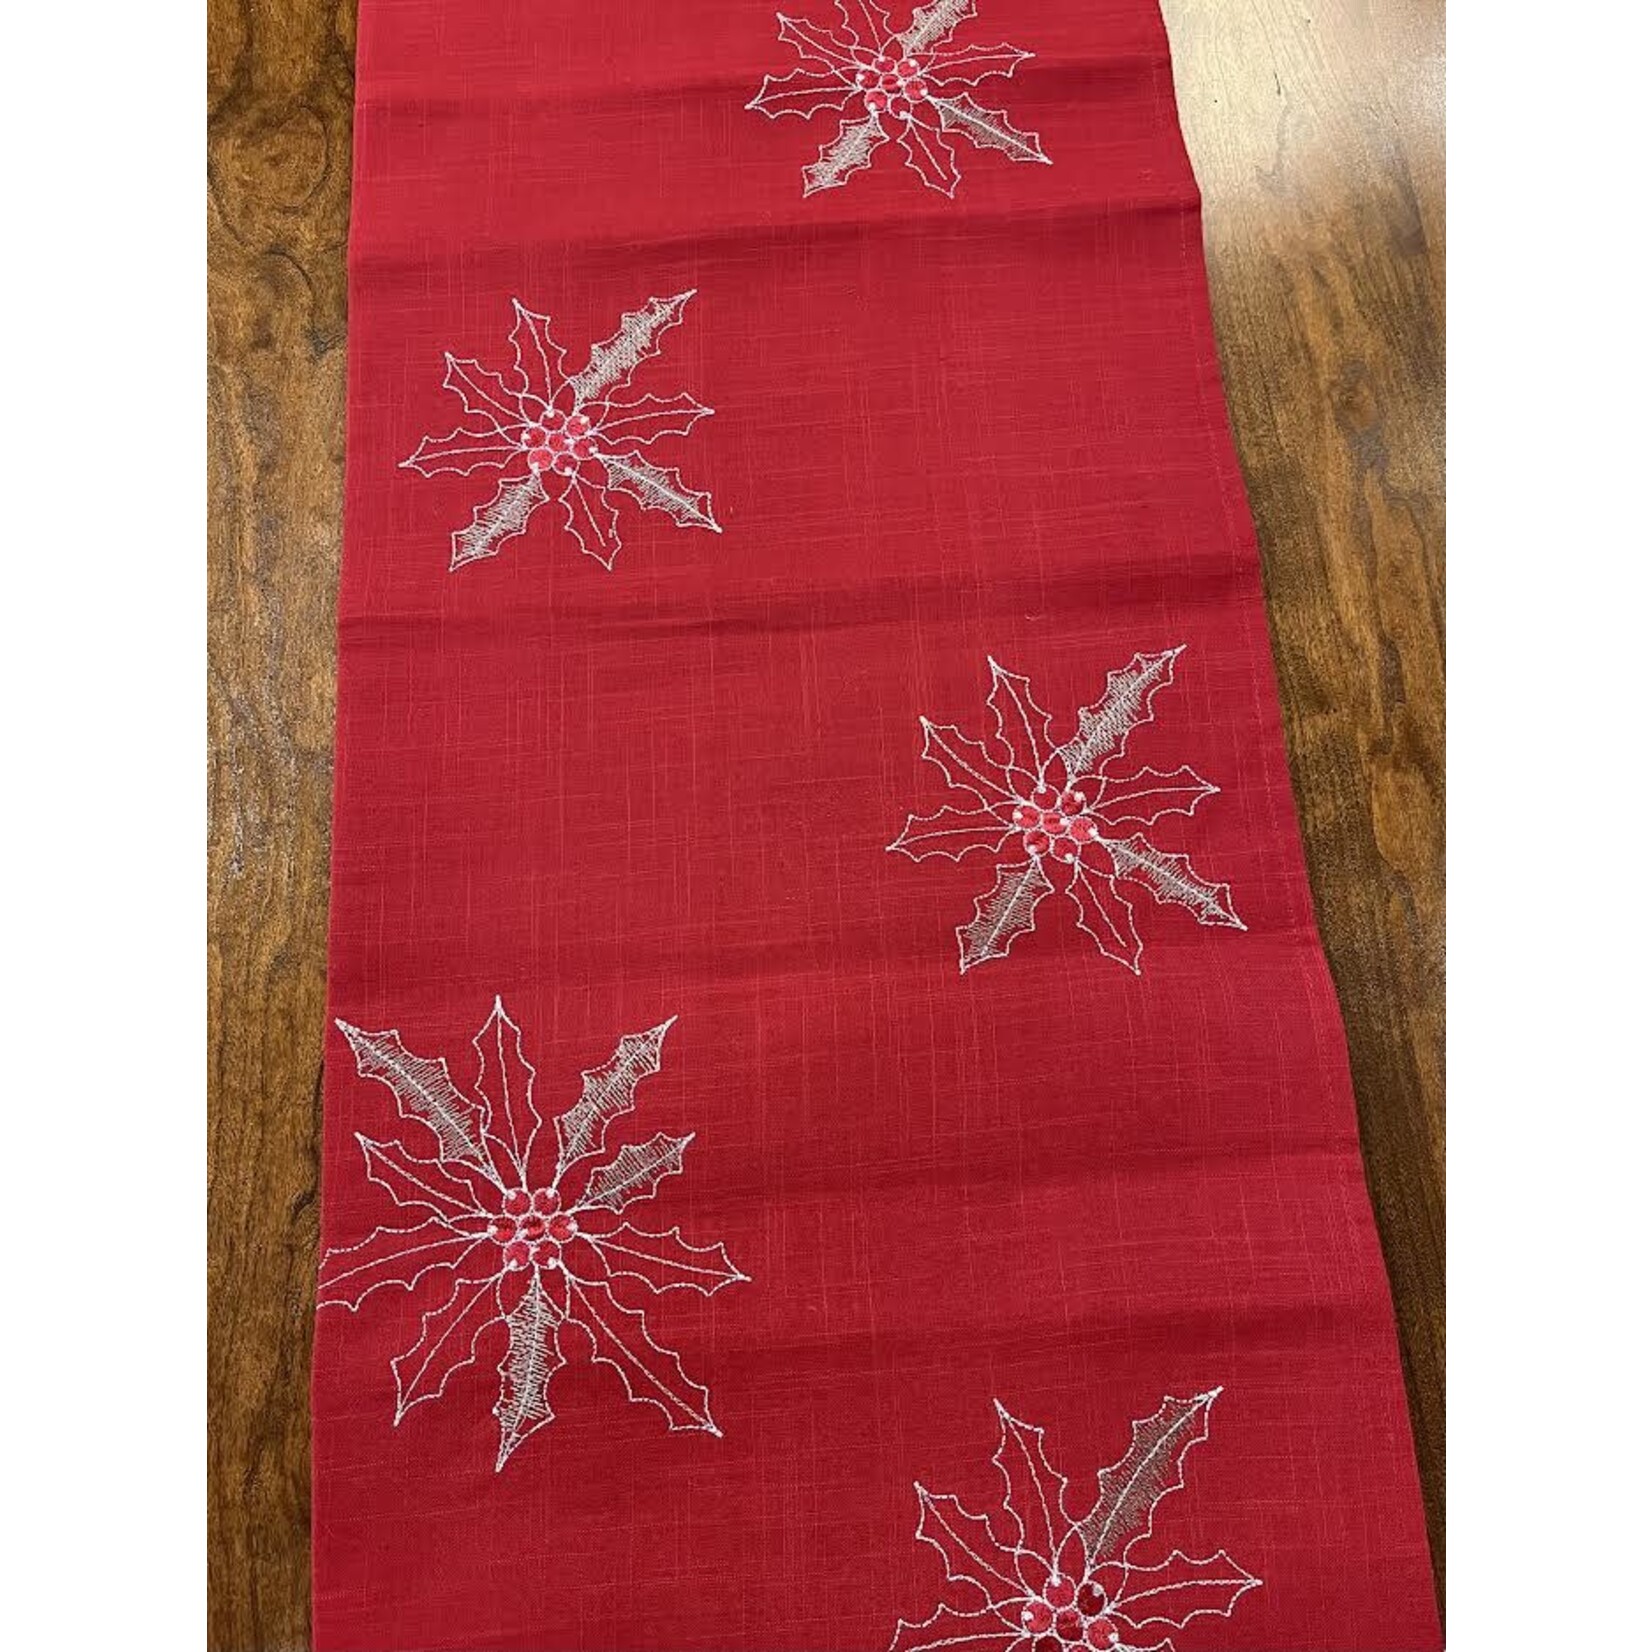 Saro Trading Company Christina Red Tablecloth Topper with Poinsettias